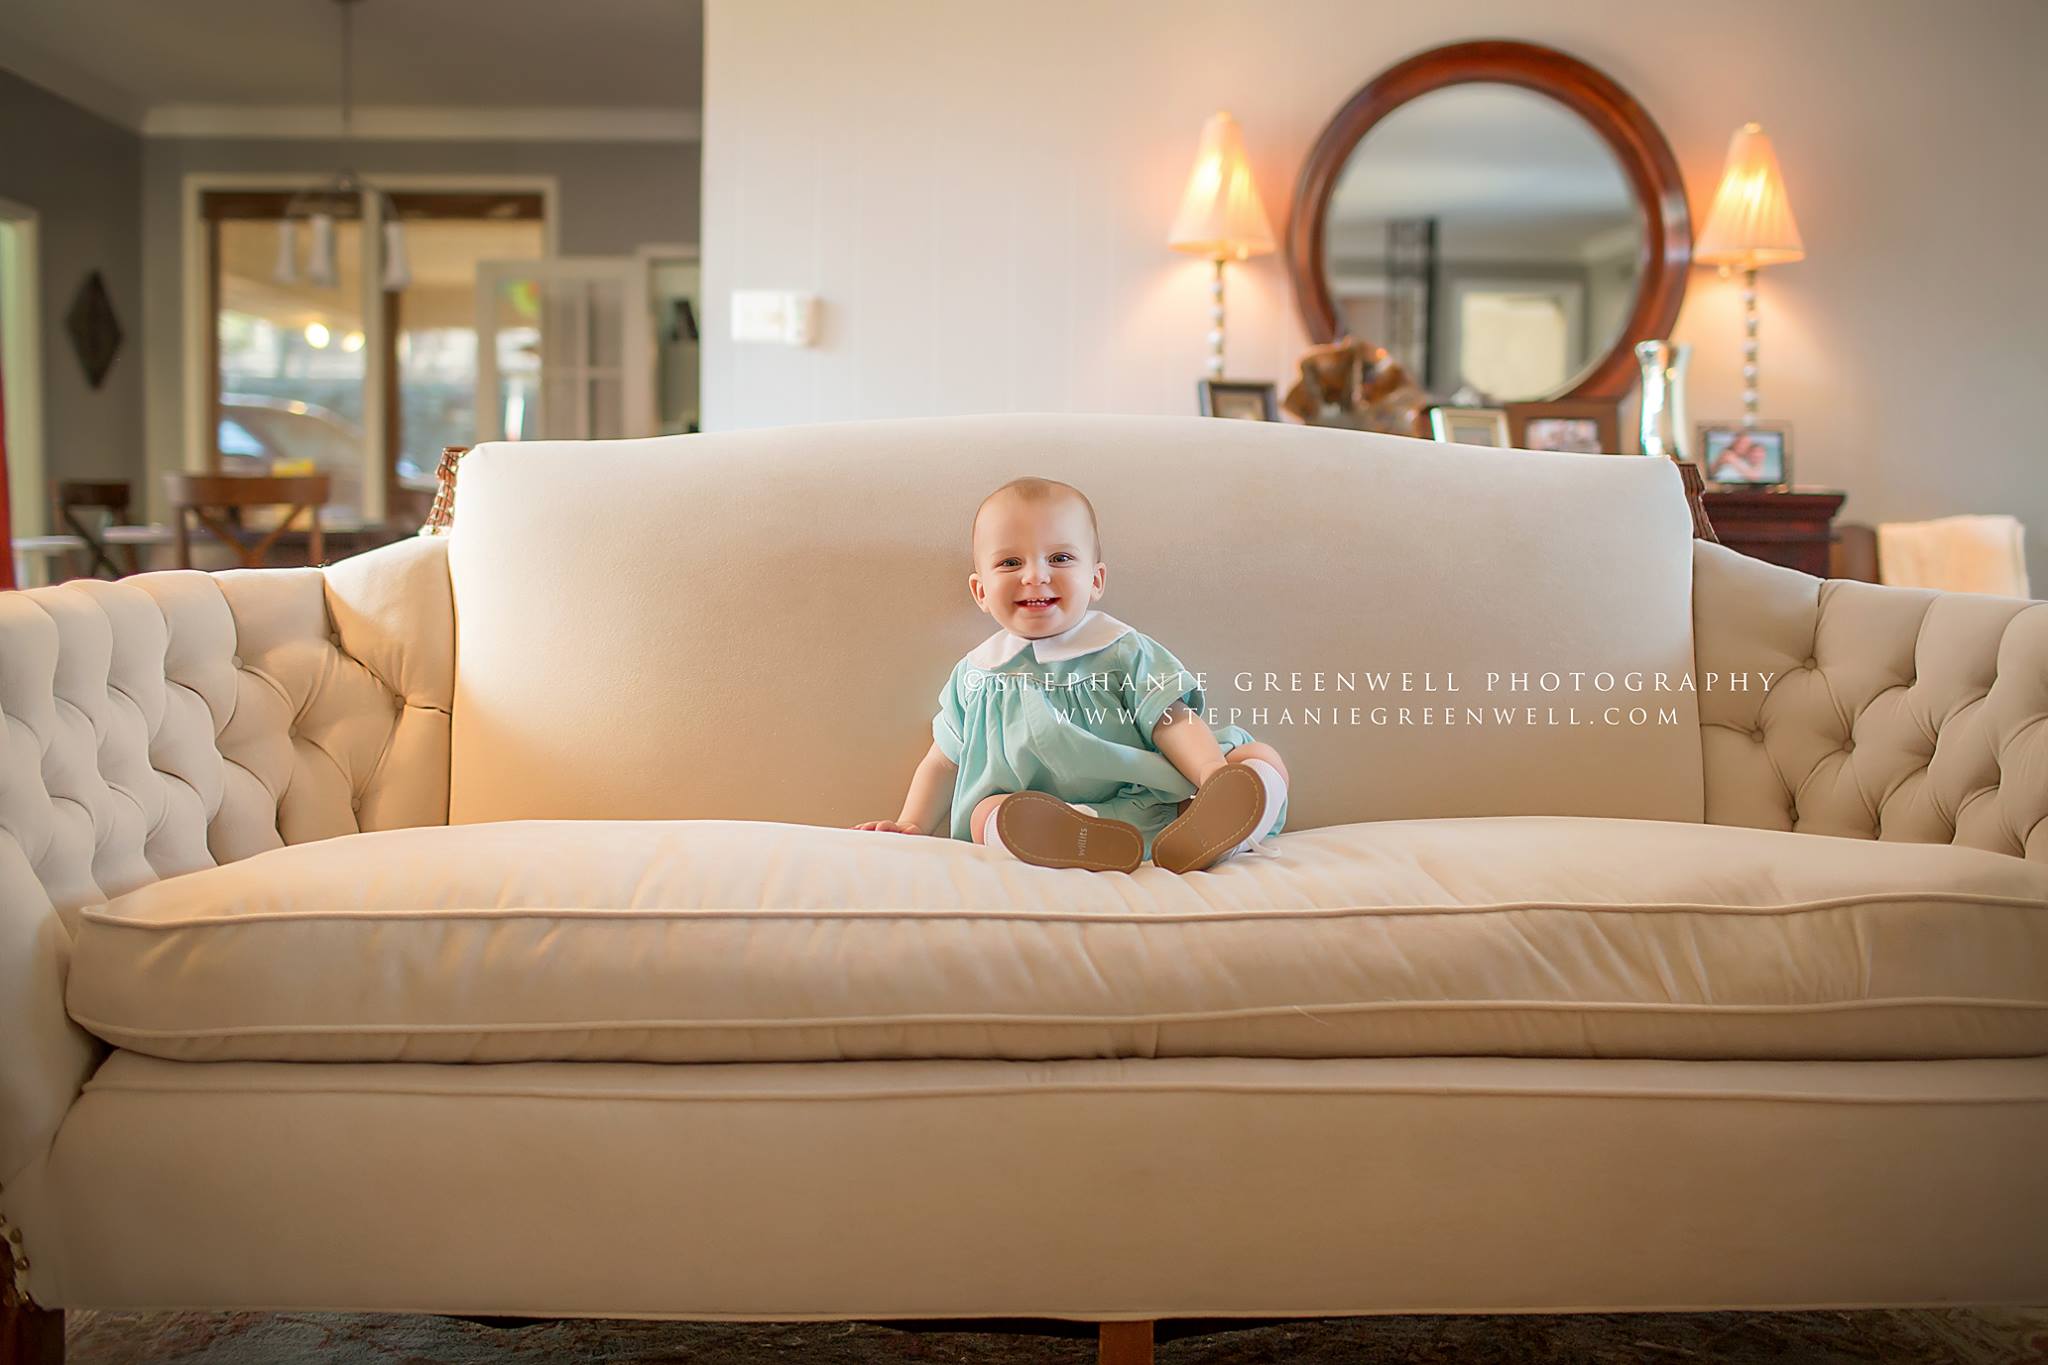 baby-on-antique-sofa-memphis-baby-photographer-stephanie-greenwell